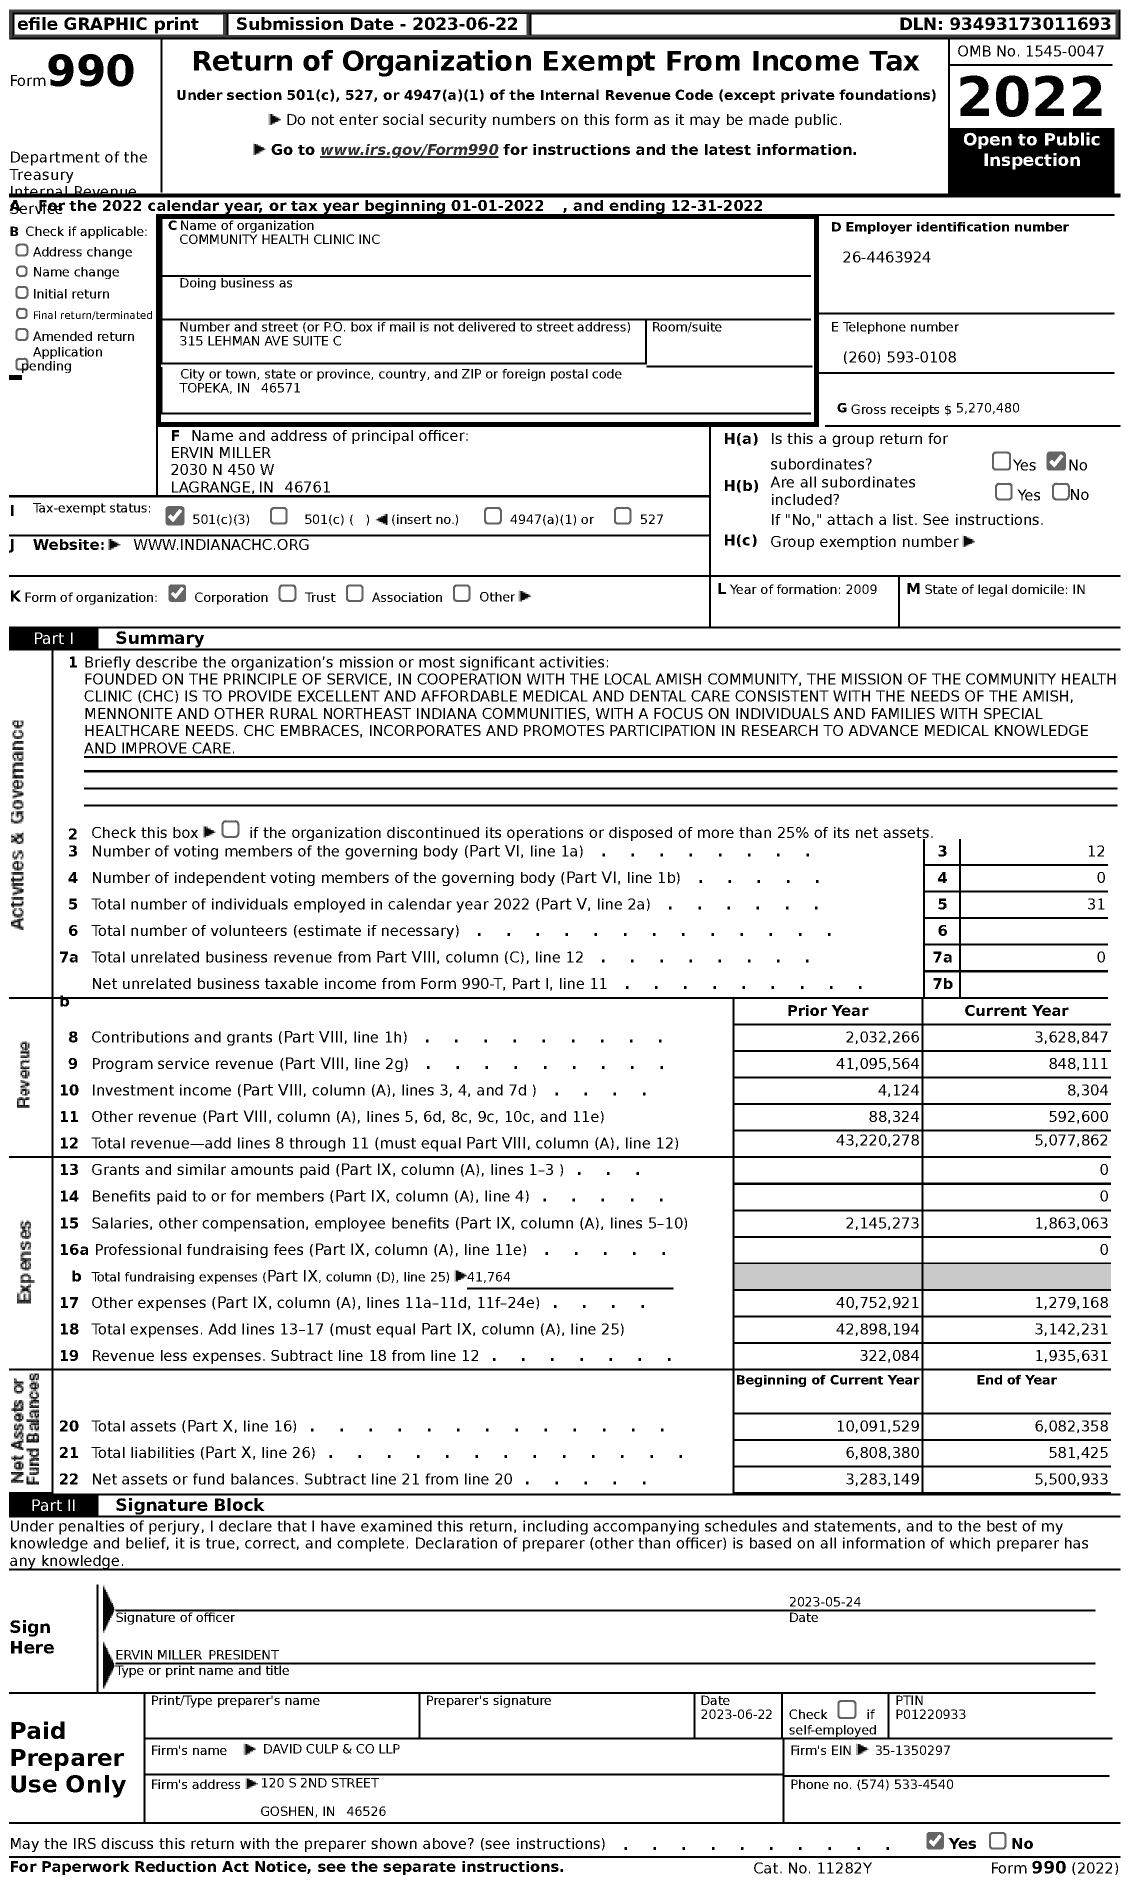 Image of first page of 2022 Form 990 for Community Health Clinic (CHC)